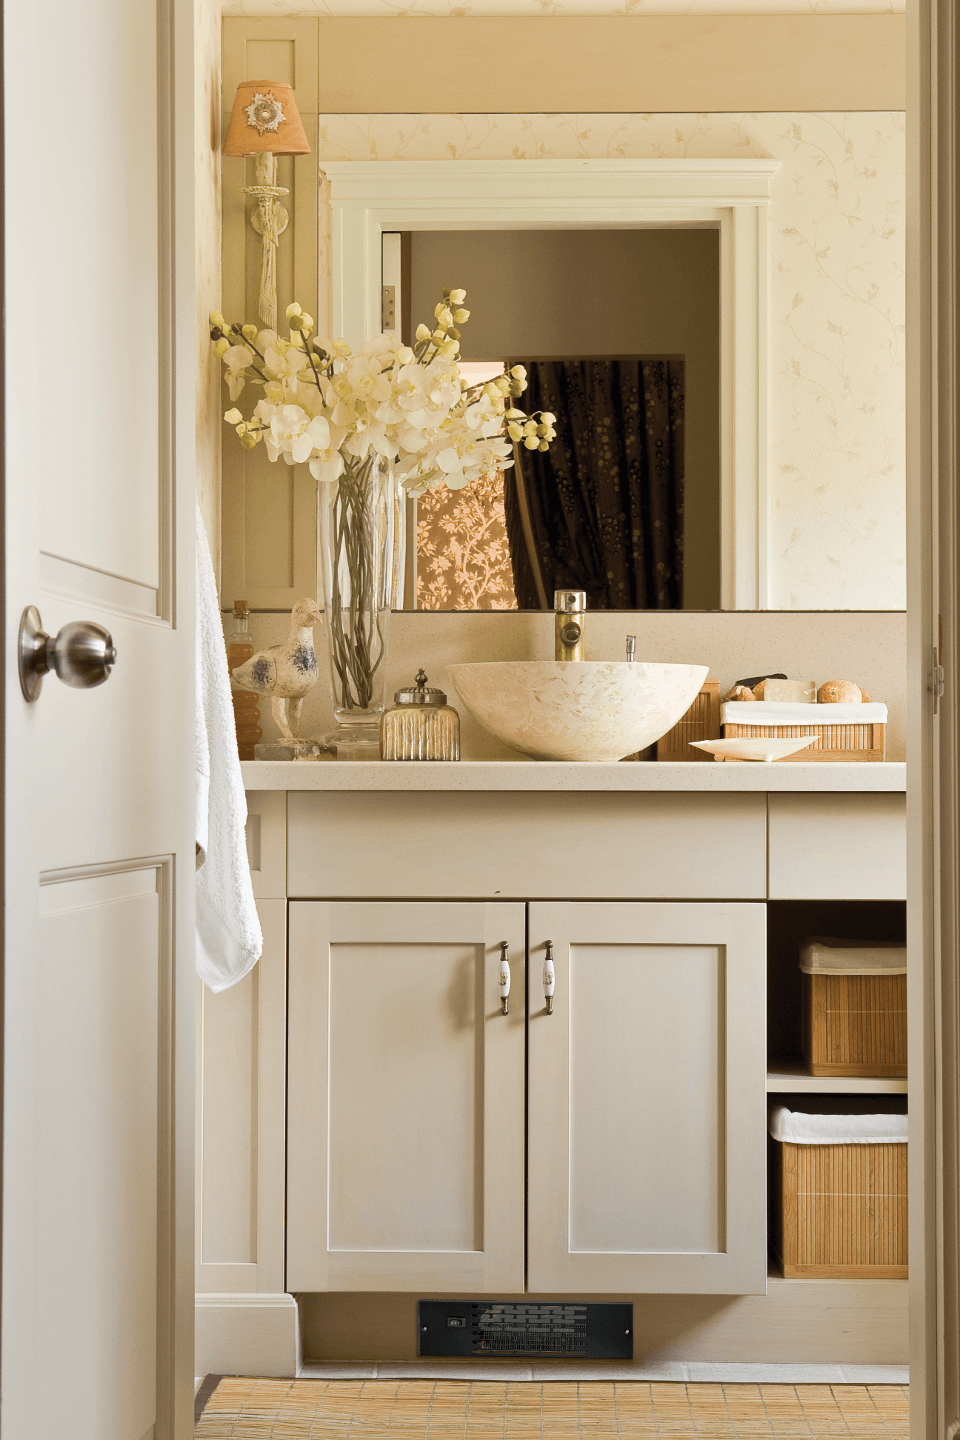 Twin Flo discreetly placed under a bathroom cabinet to keep the space warm